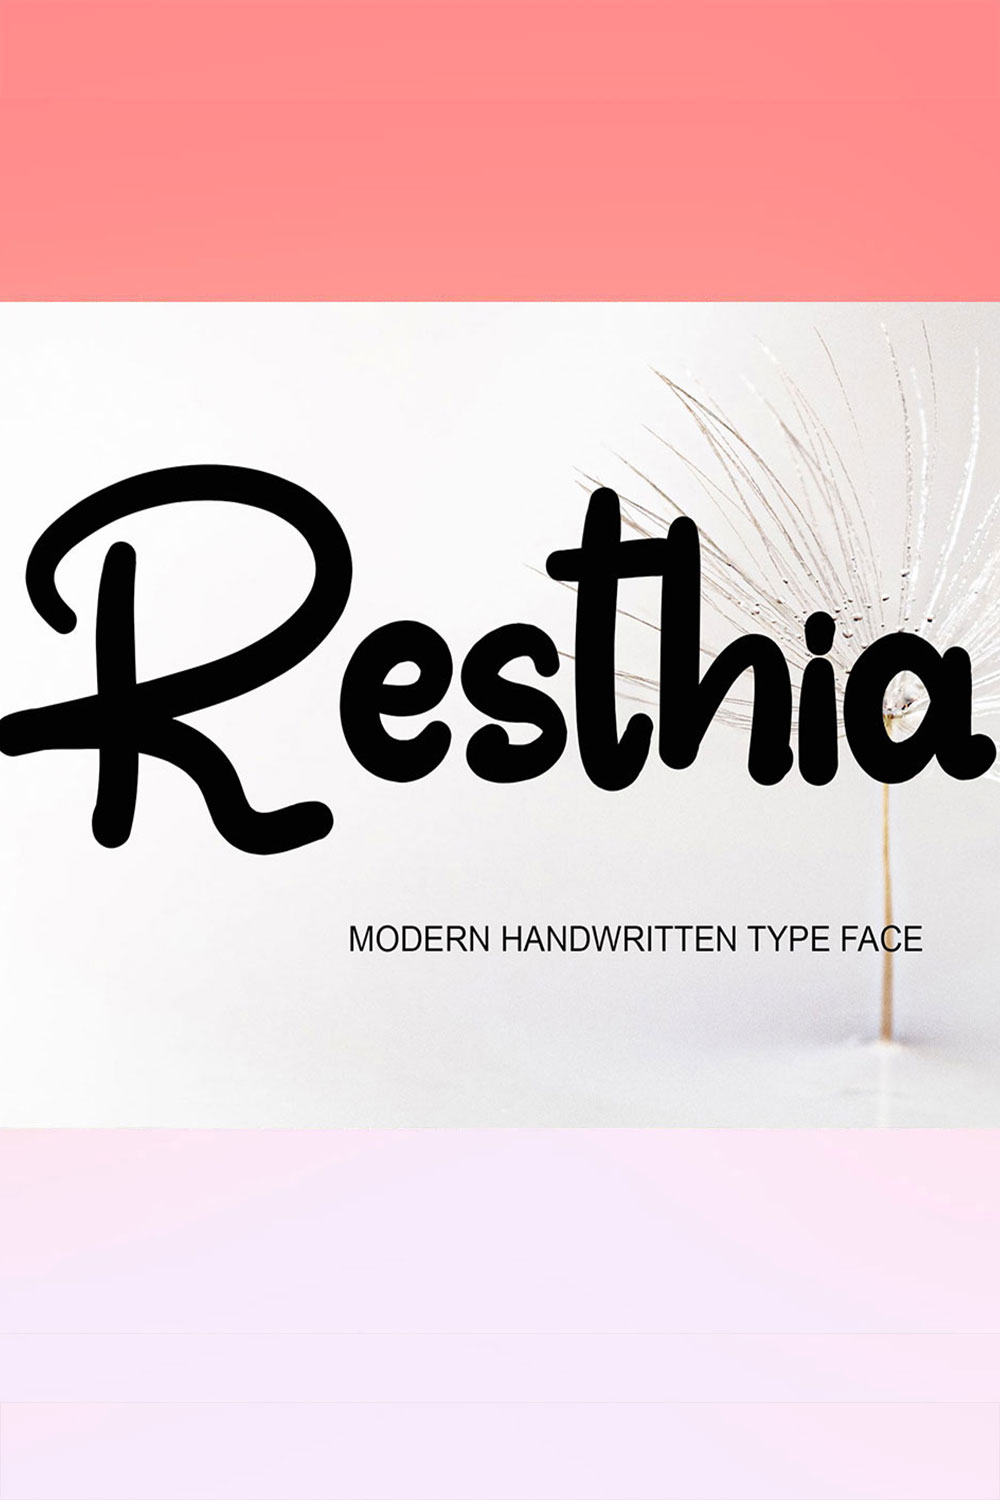 Resthia-only$6 pinterest preview image.